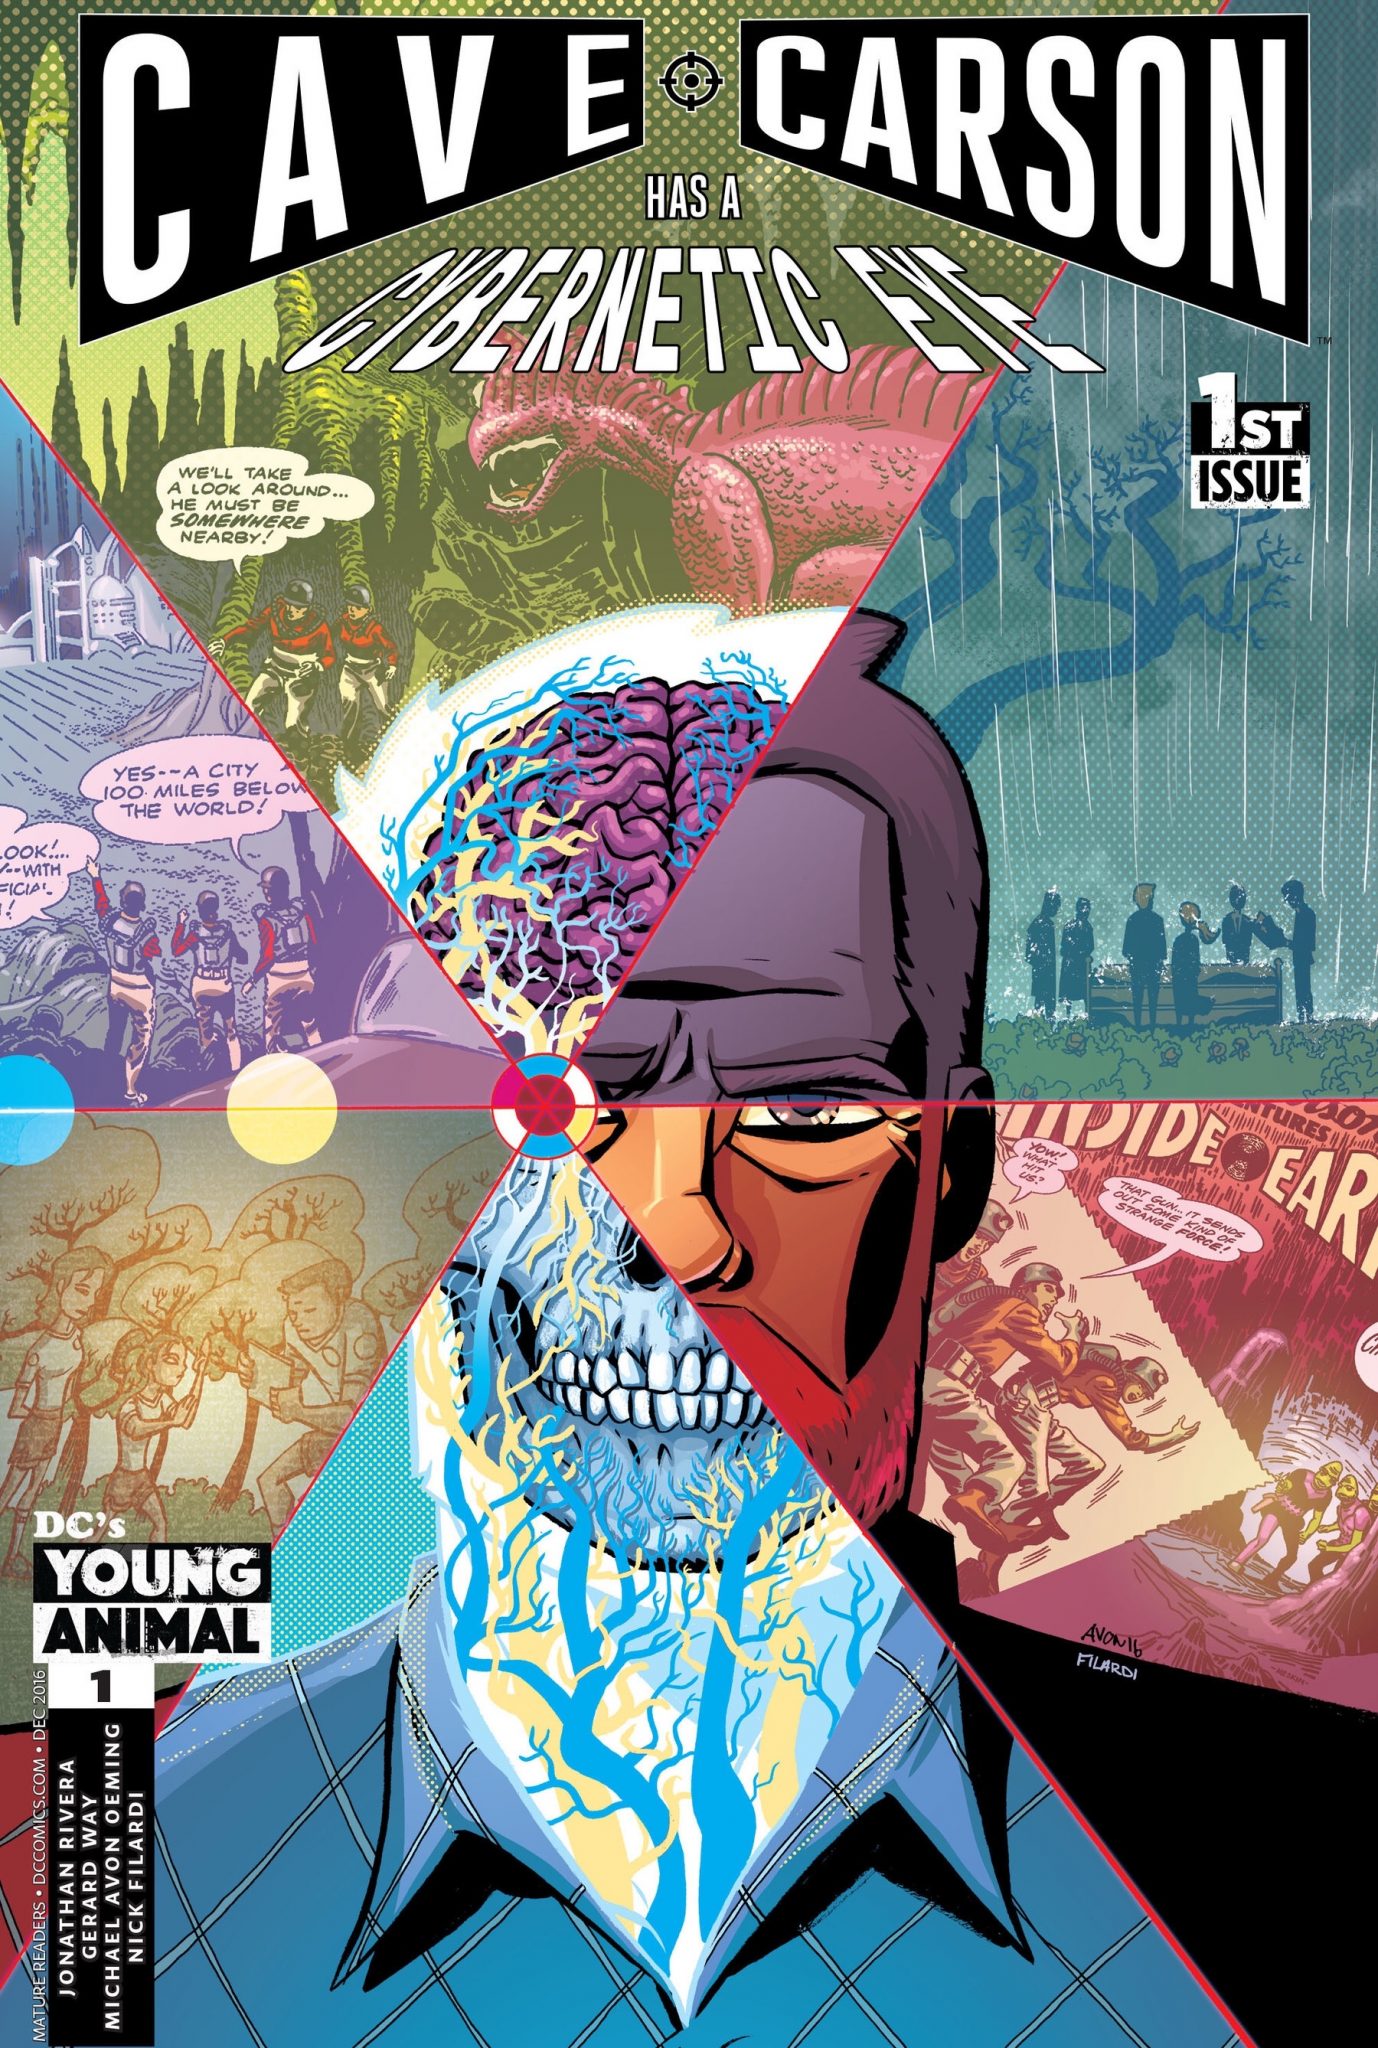 No one in DC knew why Cave Carson had a cybernetic eye, leading to Gerard Way's series